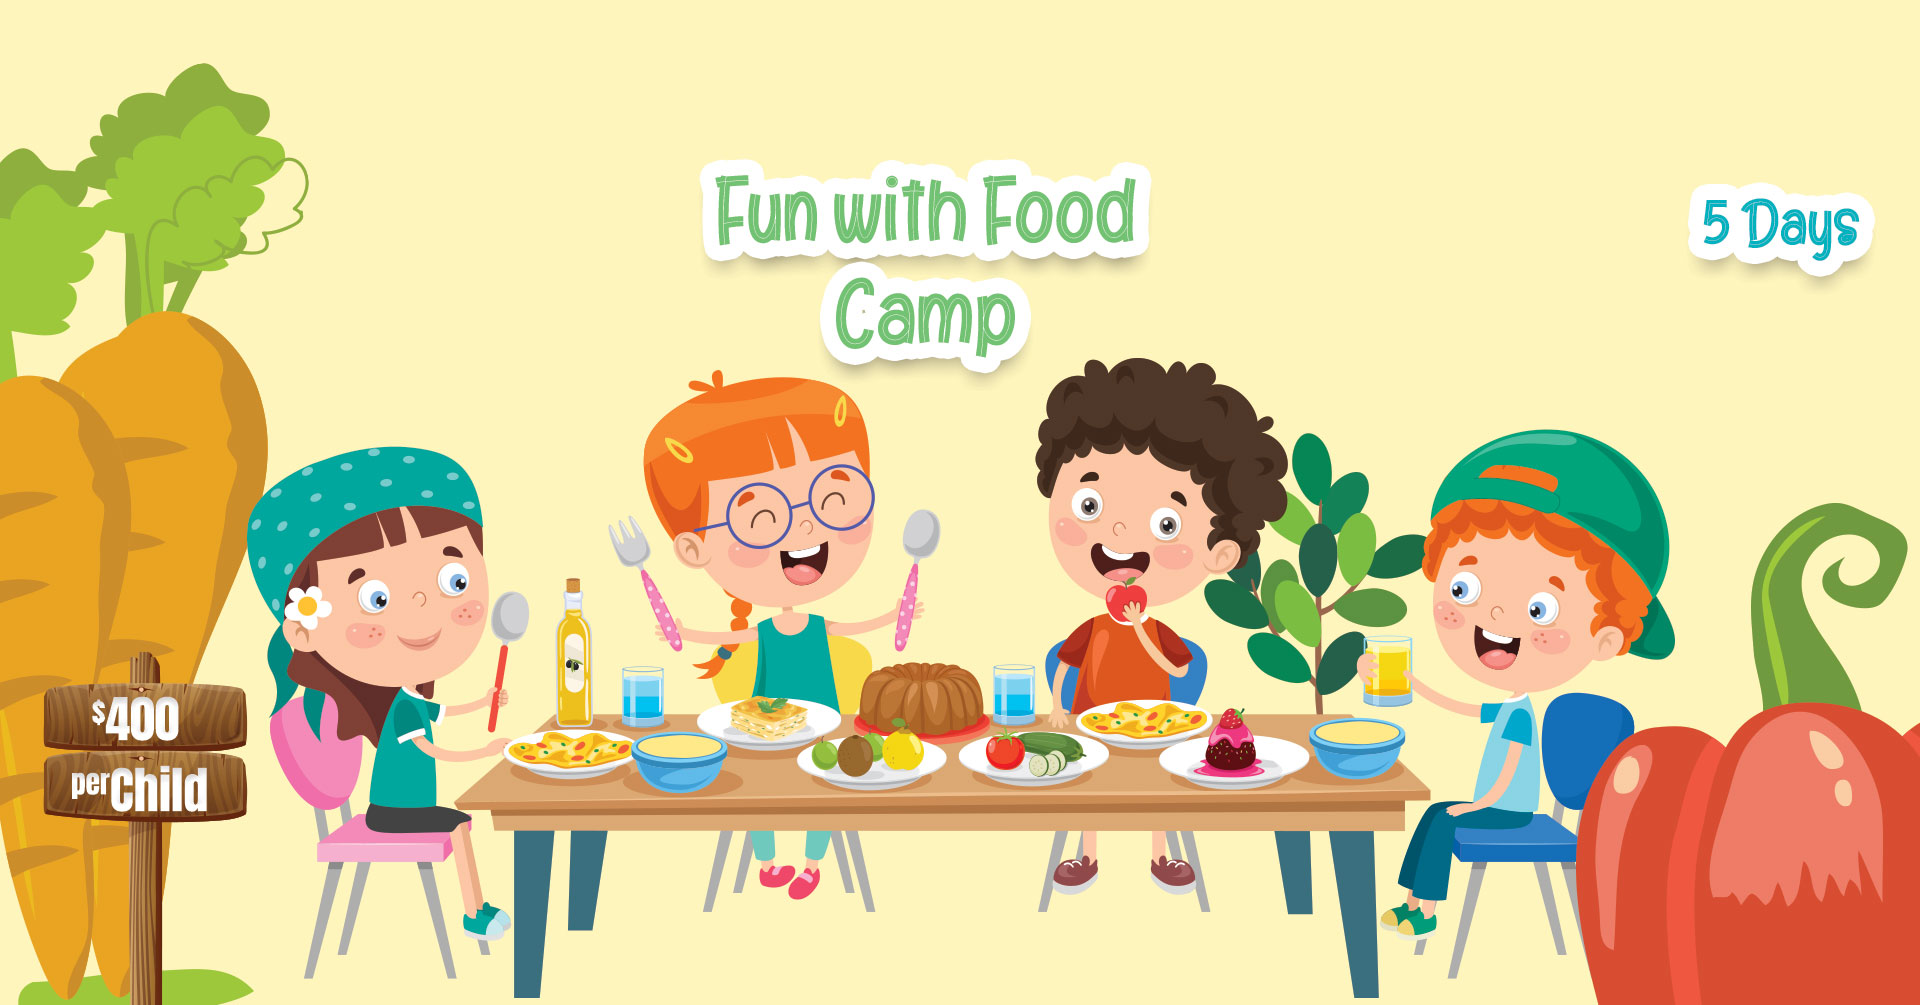 ghs-facebook-event-camps-fun-with-food-5-days-rescue